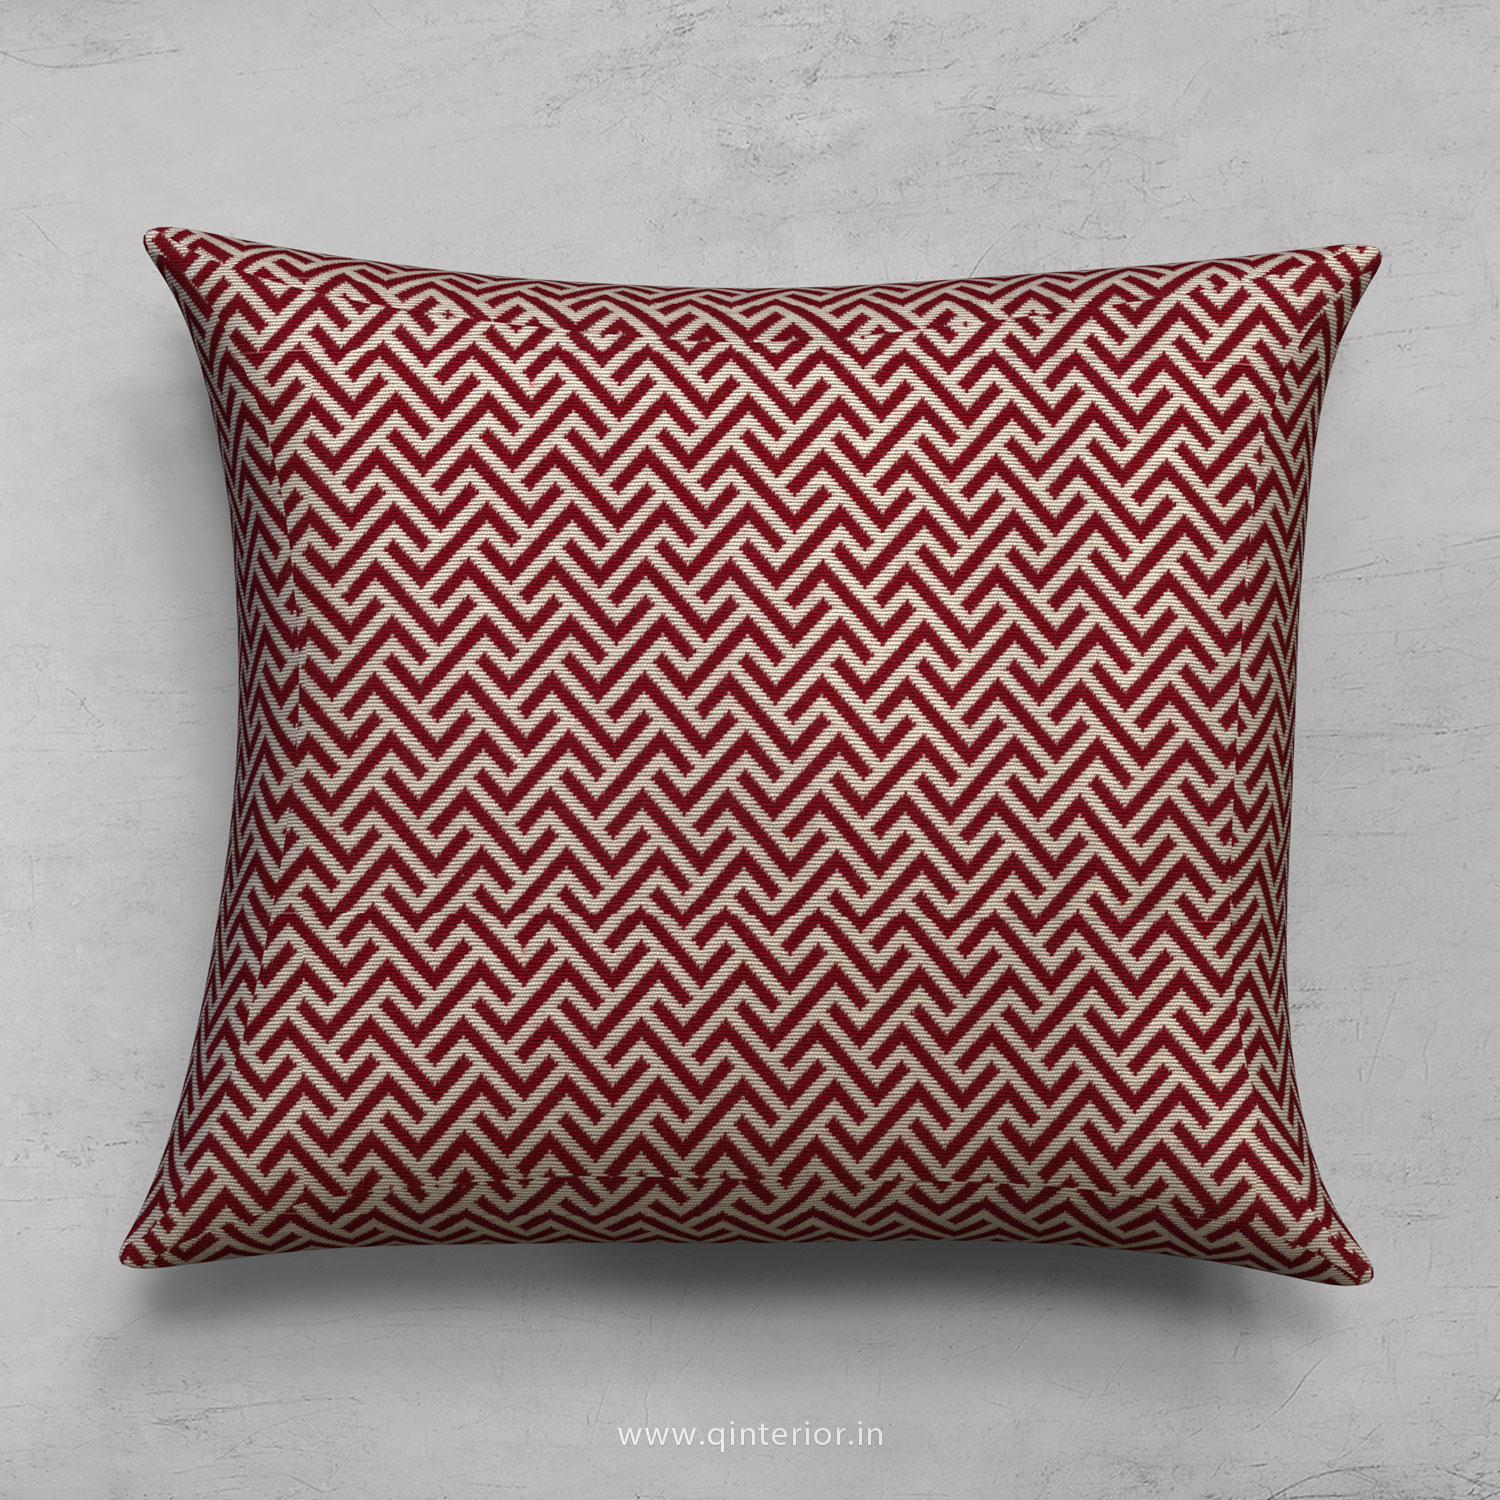 Red Zigzag Cushion With Cushion Cover - CUS001 BG